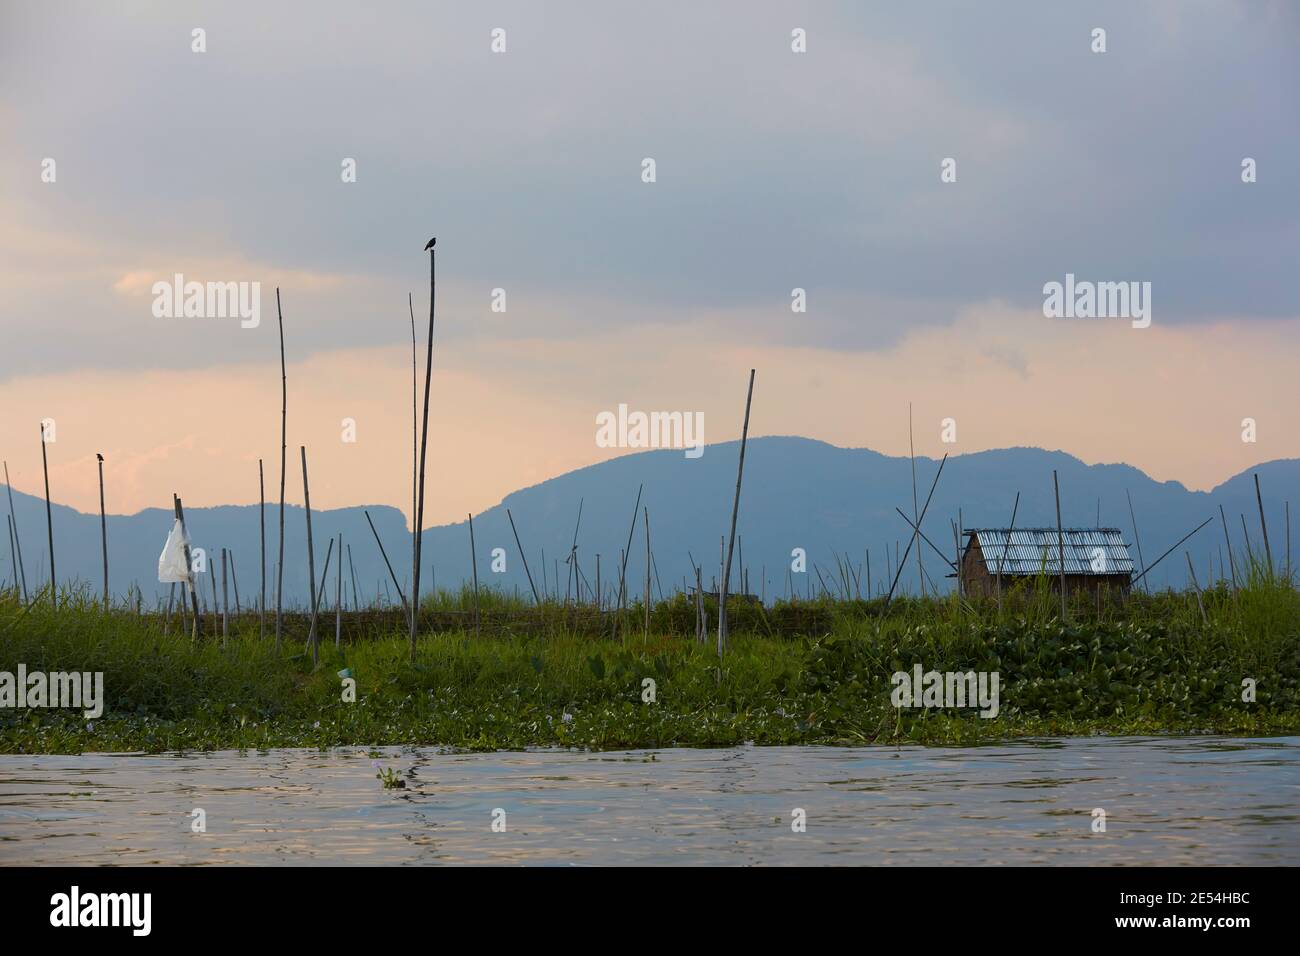 View of the Inle Lake landscape at sunset, Myanmar. Stock Photo